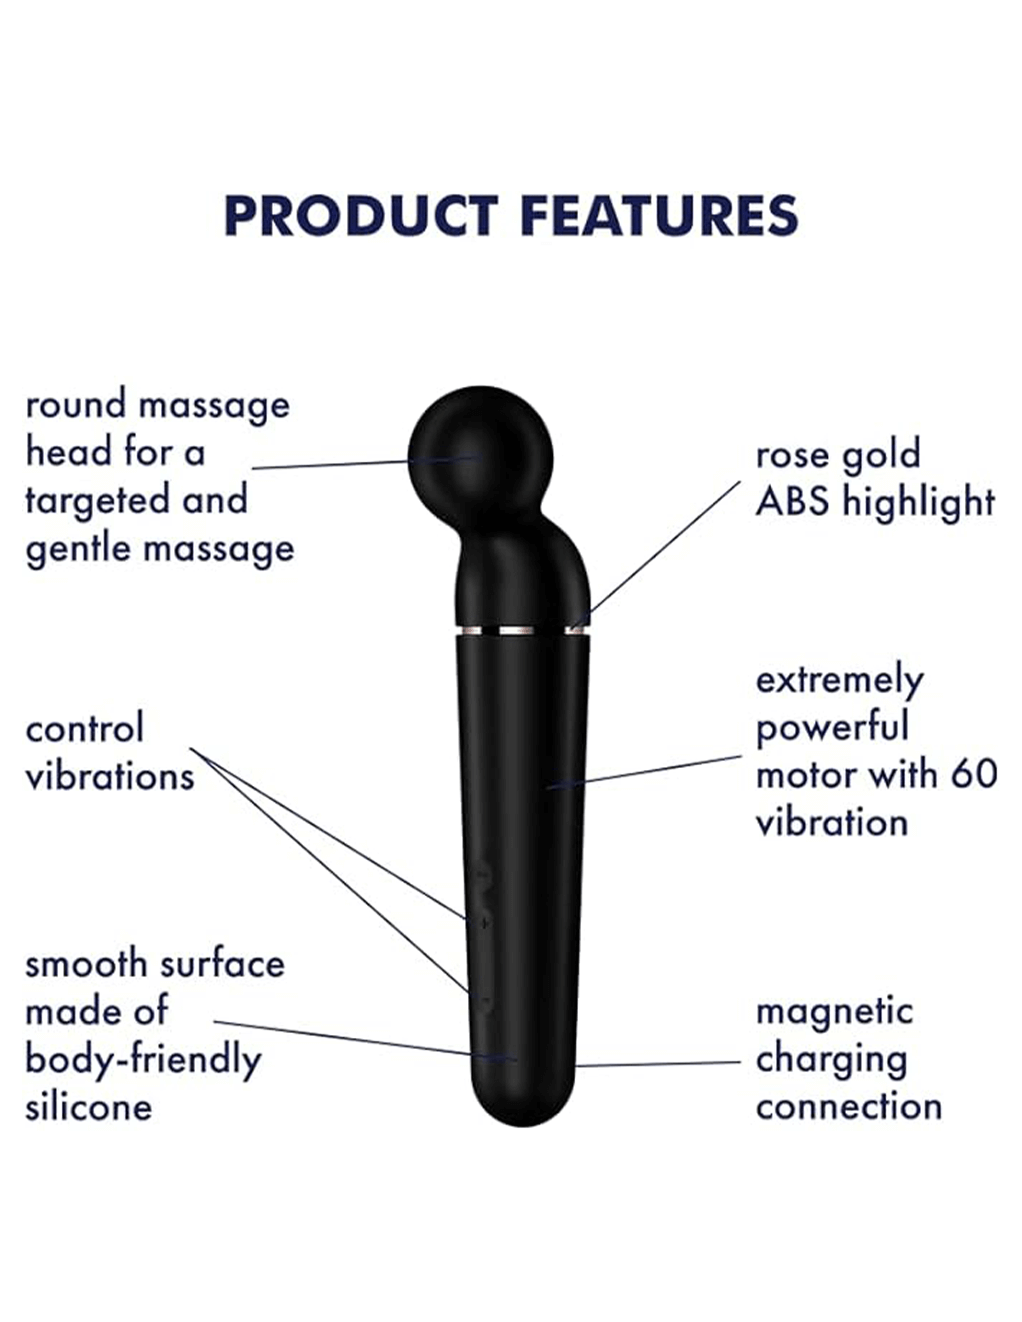 Satisfyer Planet Wand-er Massager Wand Vibrator - Black Product Features